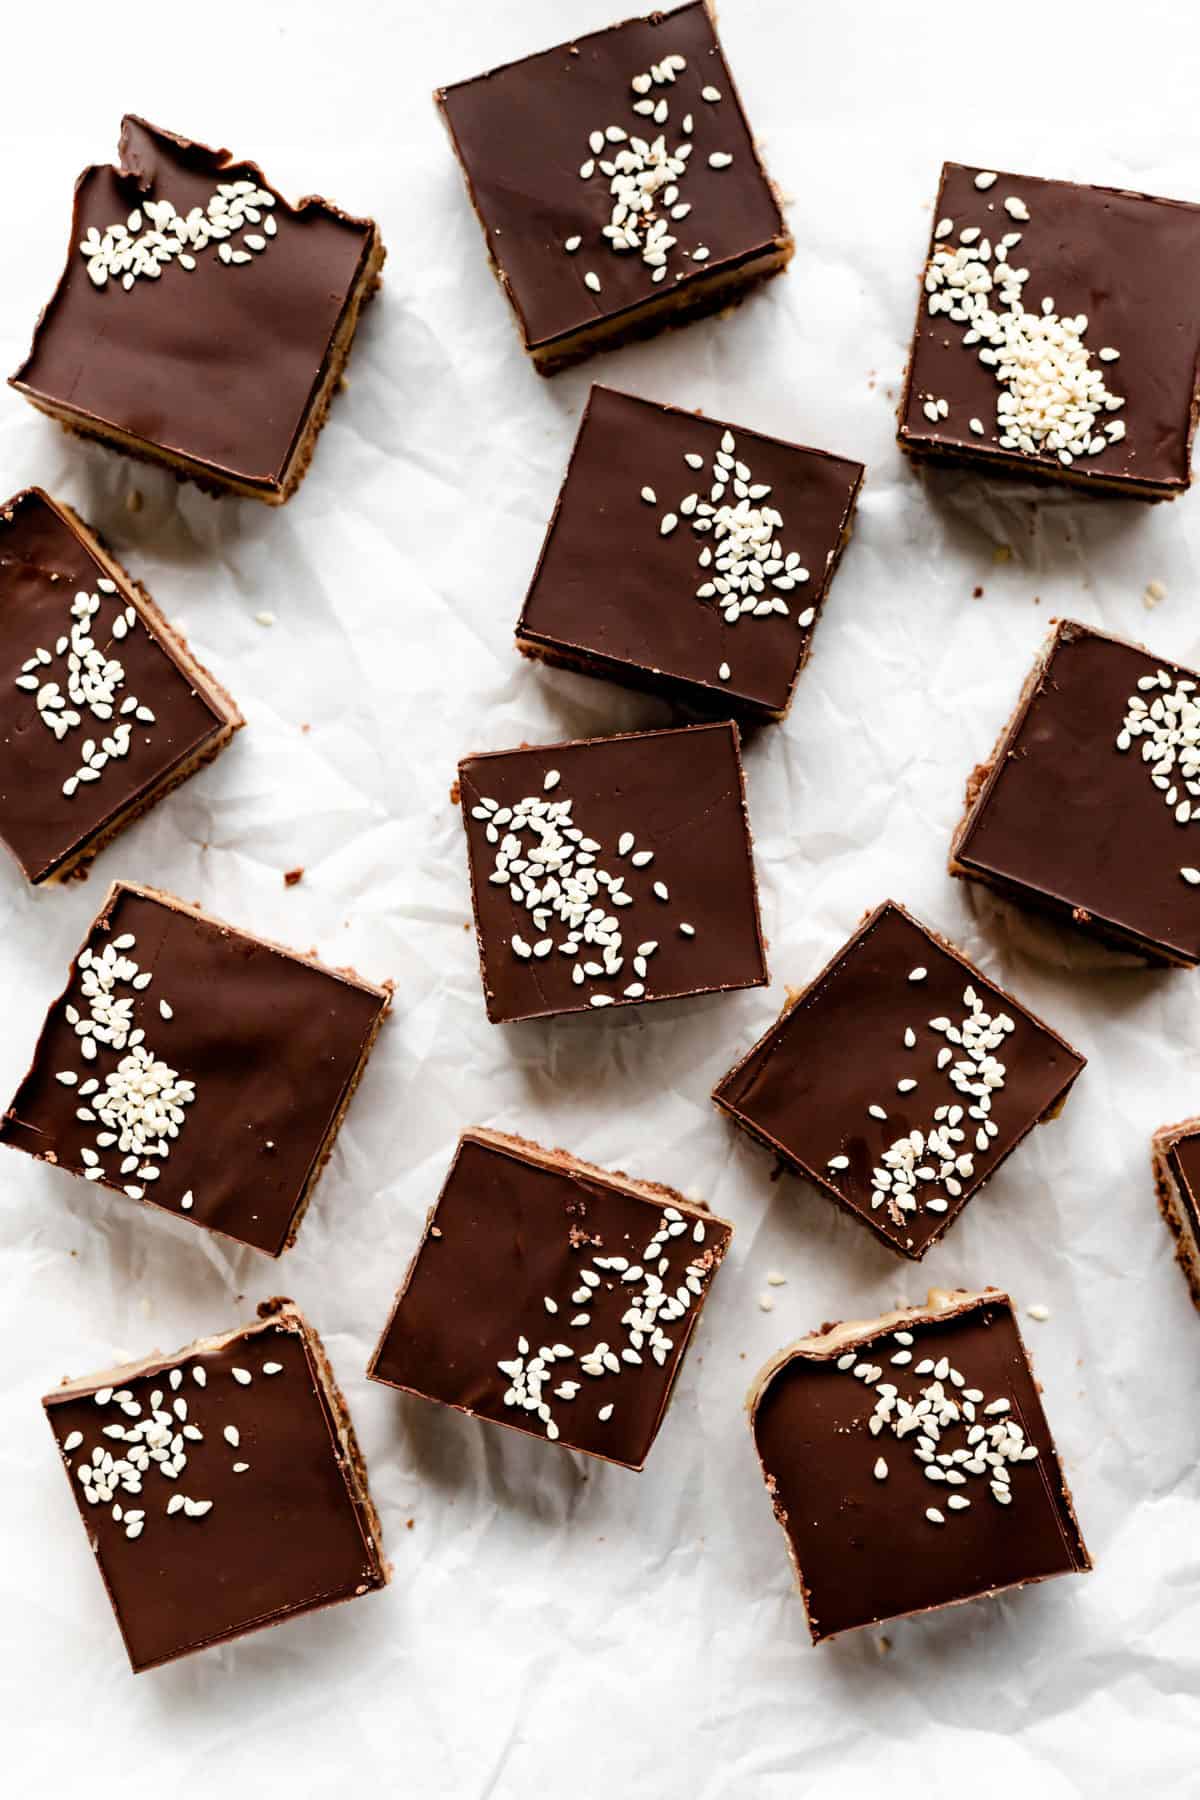 tahini bars on parchment paper